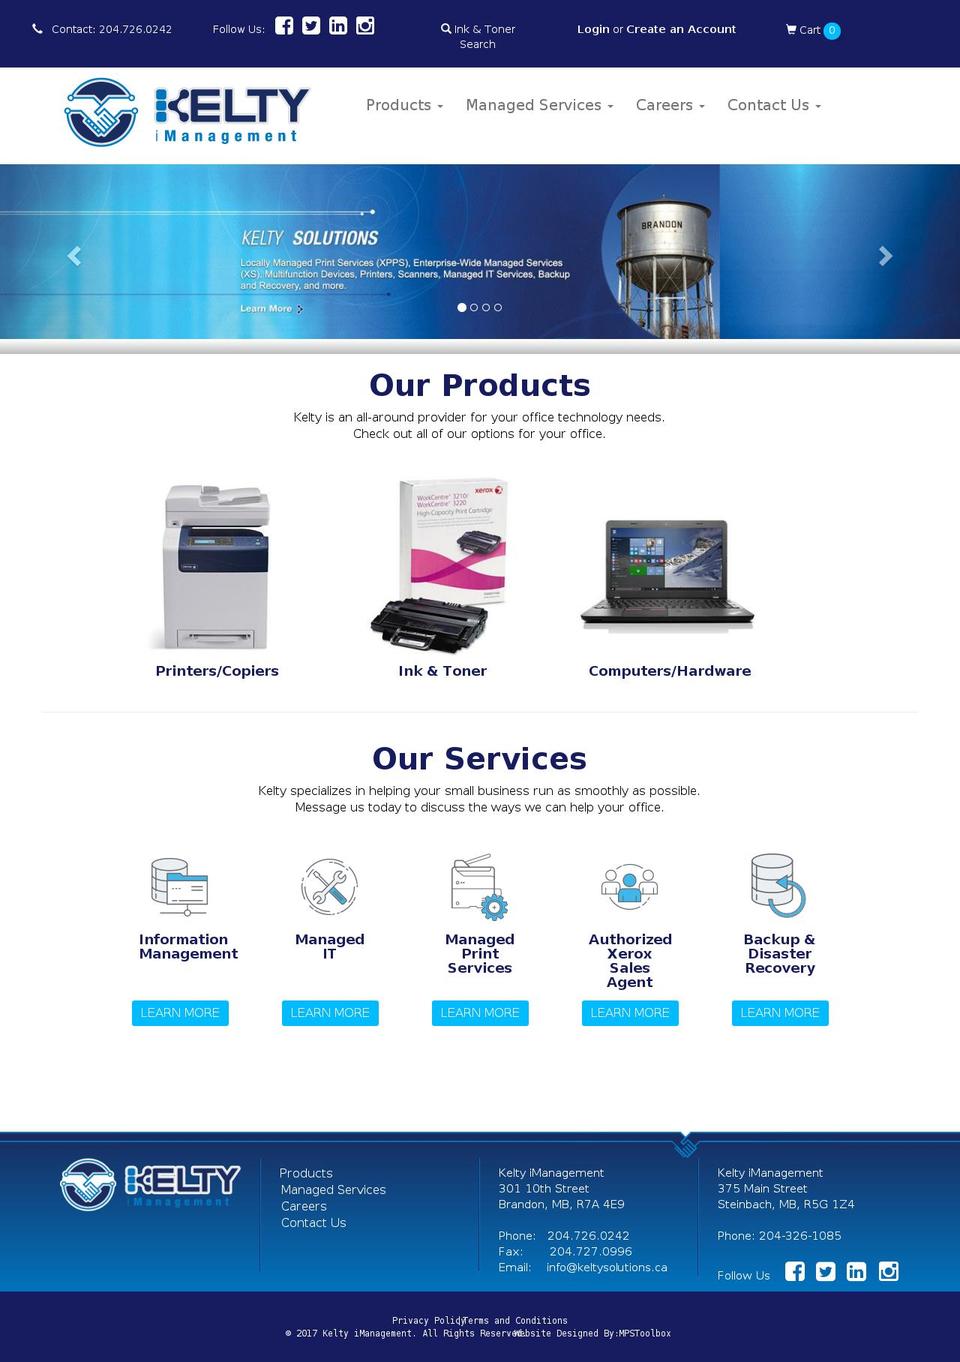 bootstrap-3 Shopify theme site example keltysolutions.com